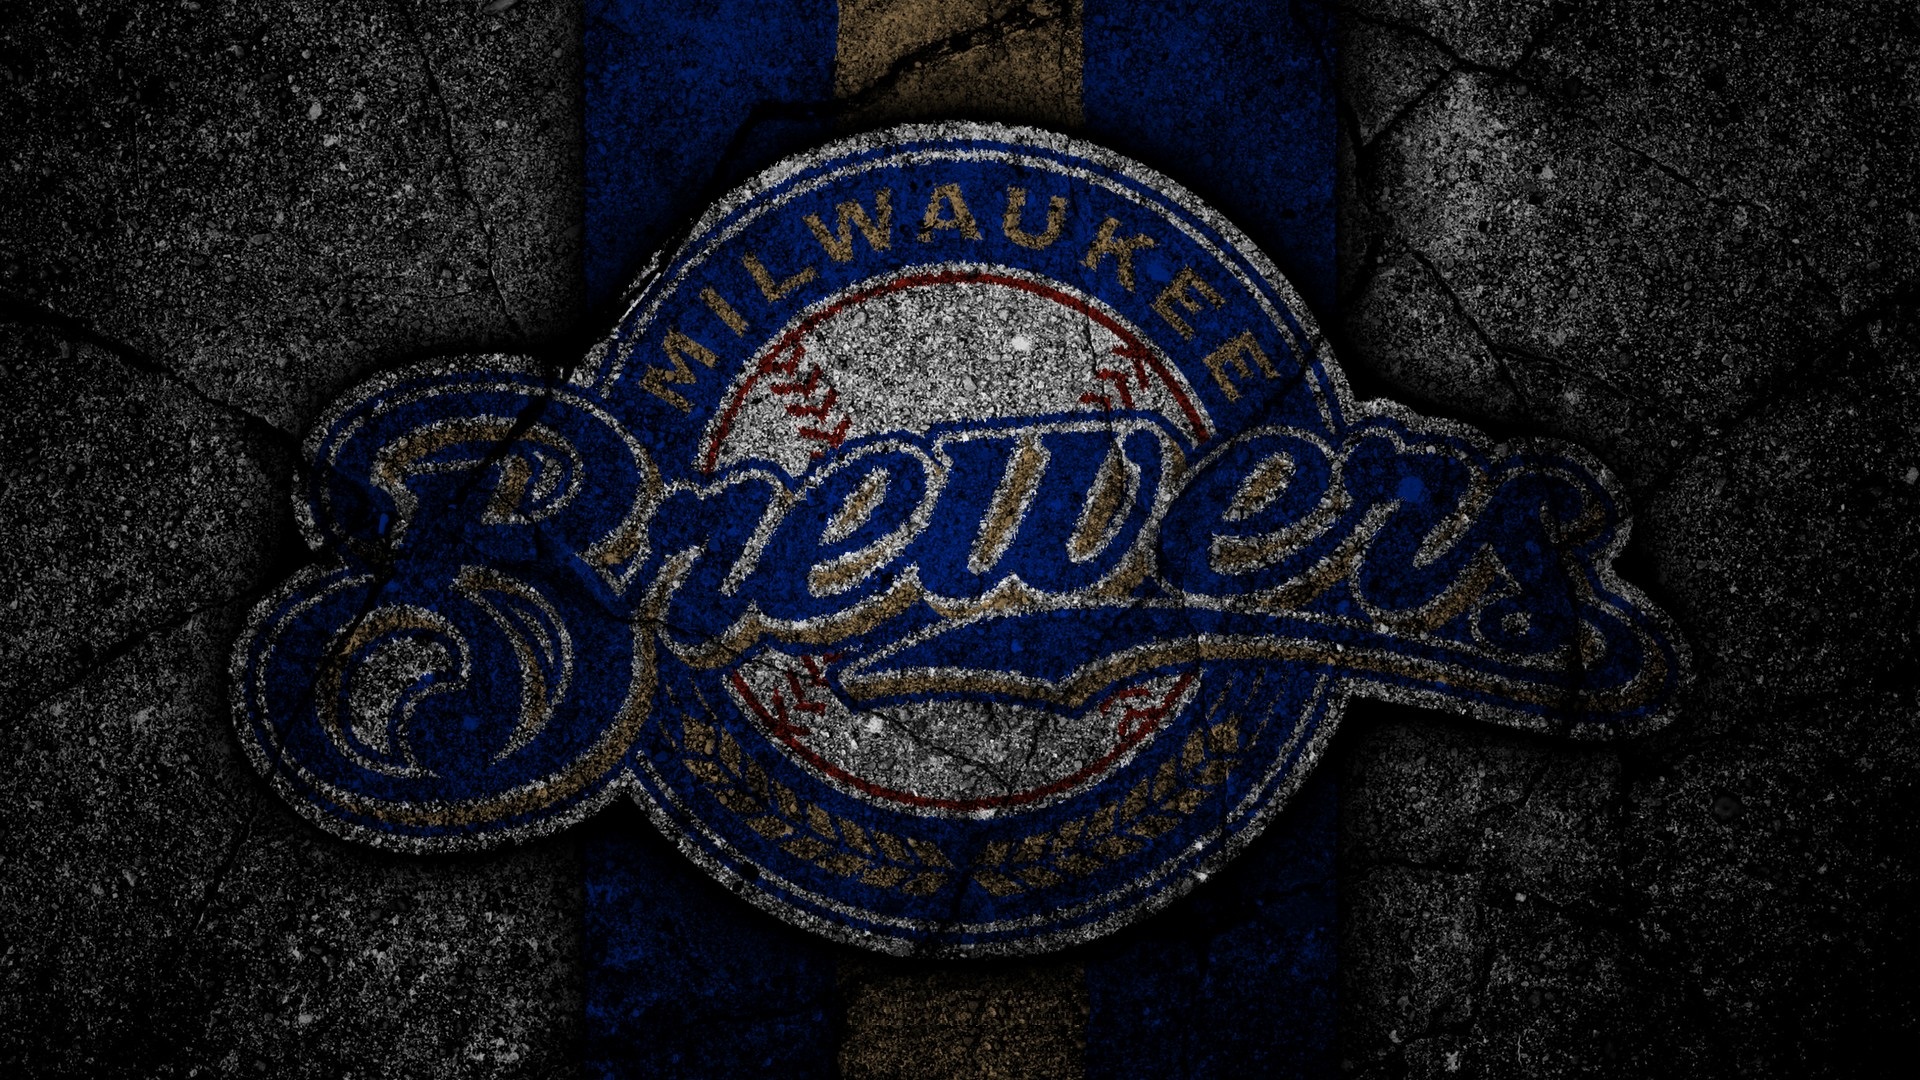 Milwaukee Brewers Wallpaper For Mac with high-resolution 1920x1080 pixel. You can use this wallpaper for Mac Desktop Wallpaper, Laptop Screensavers, Android Wallpapers, Tablet or iPhone Home Screen and another mobile phone device